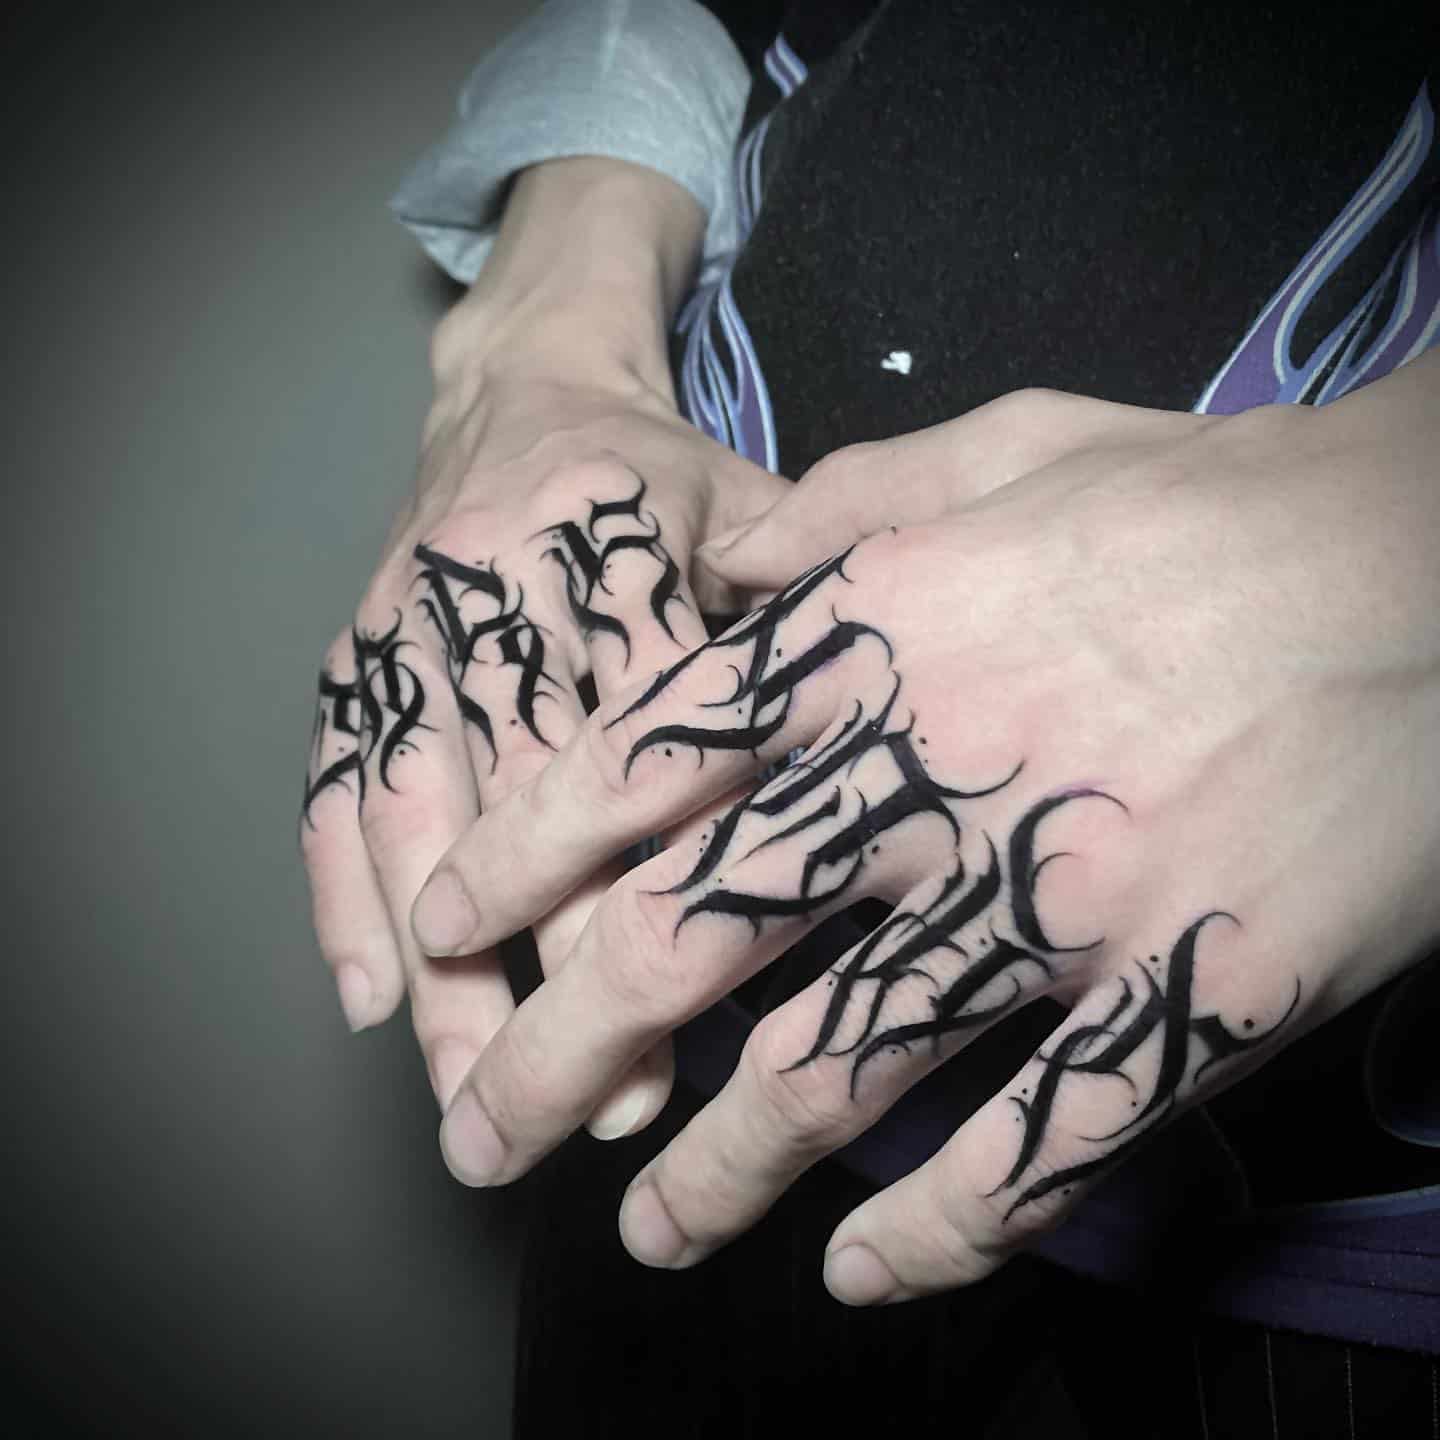 30 cool fingers tattoo ideas for men | small tattoo ideas for men - YouTube